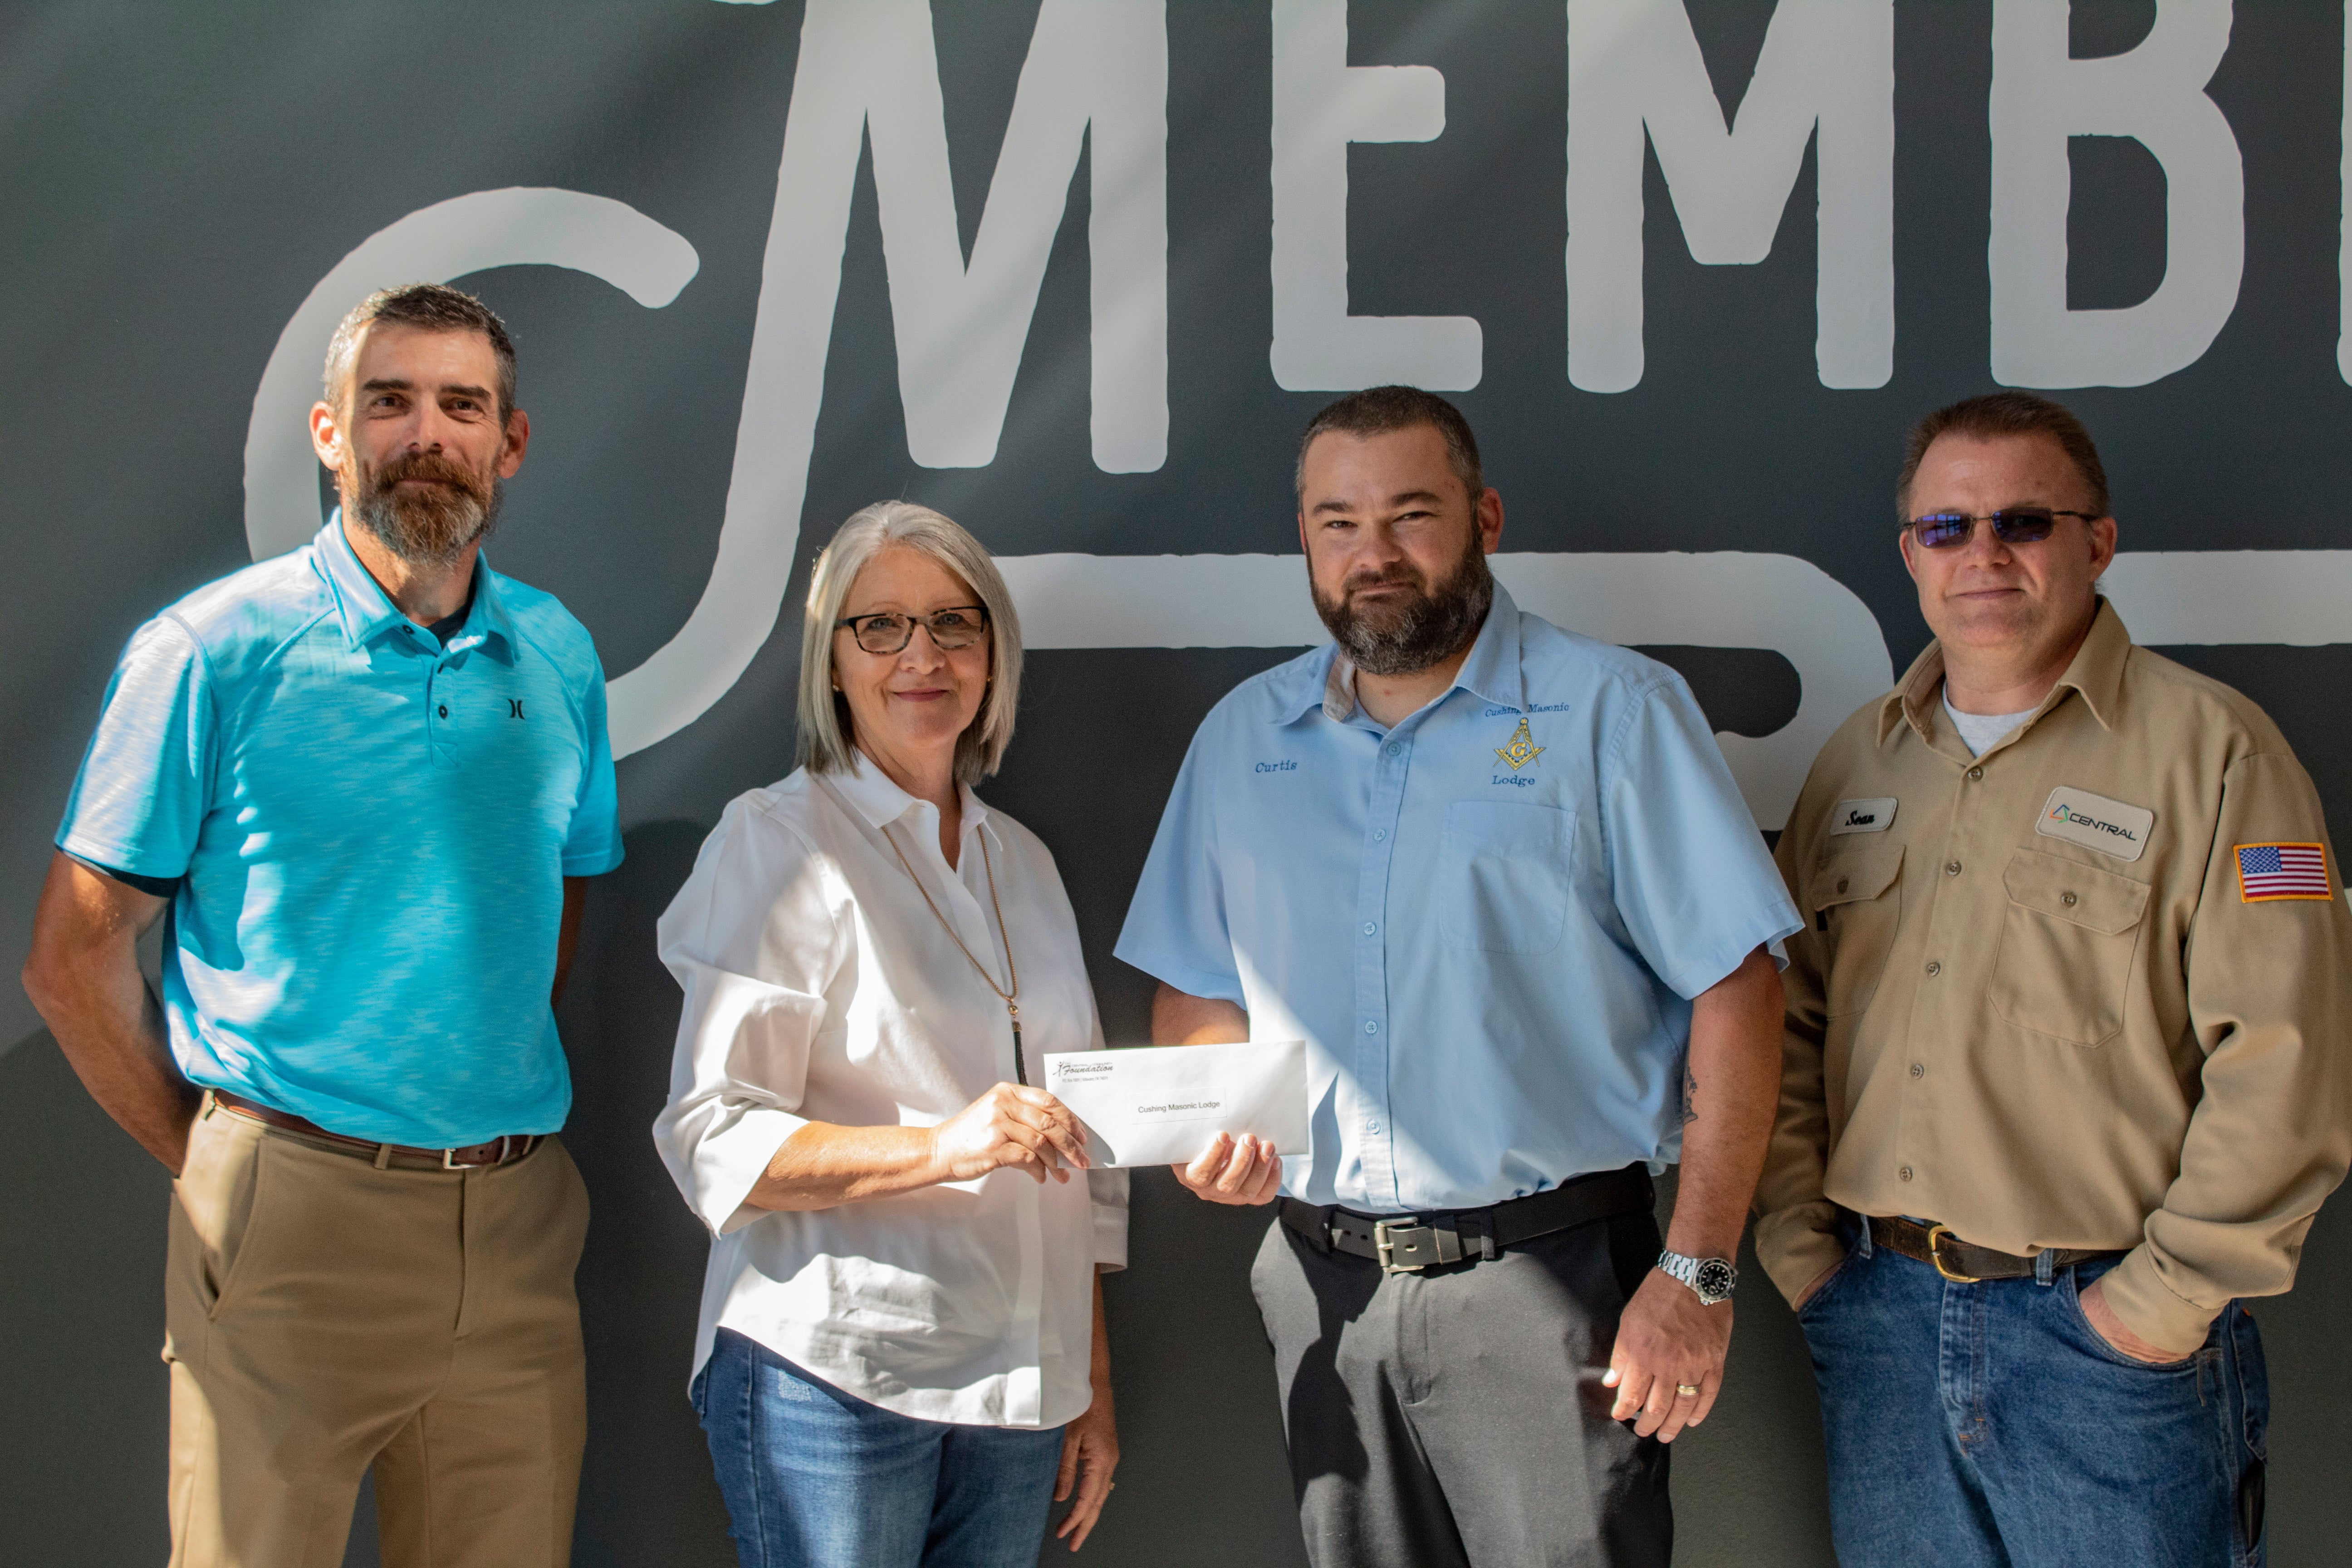 Central District 6 Trustee James Well and Central Community Foundation Board Member Gail Cookerly present a grant to Cushing Masonic Lodge members Curtis Meloy and Sean Martin.